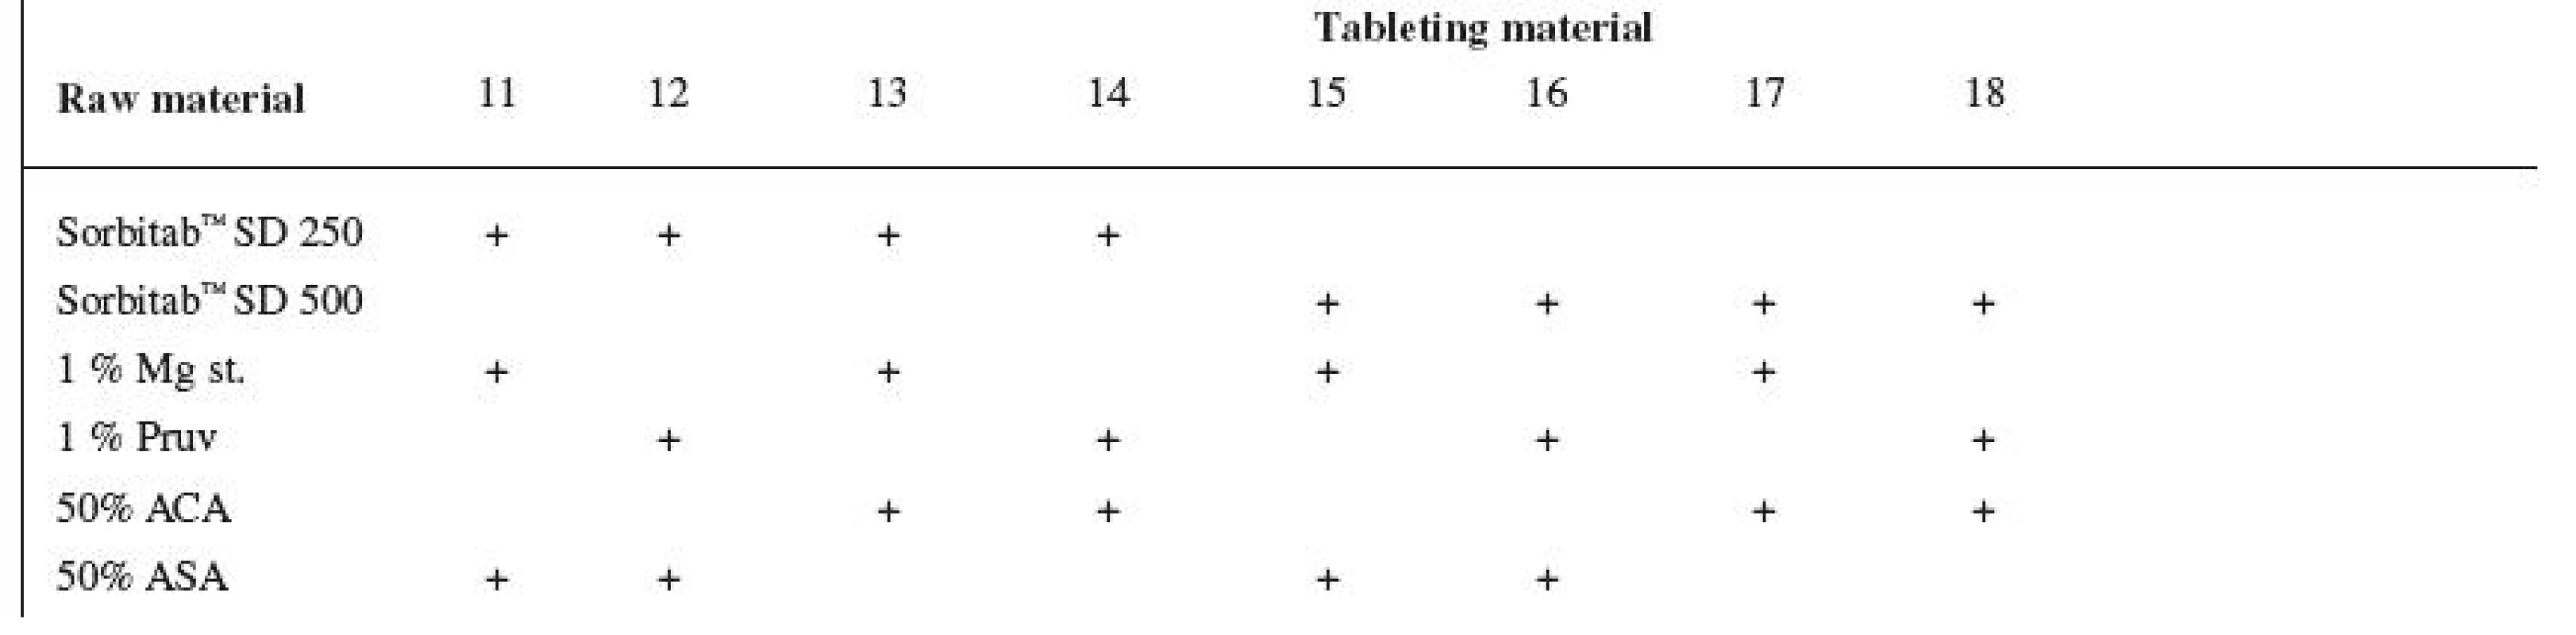 Tableting materials with active ingredients